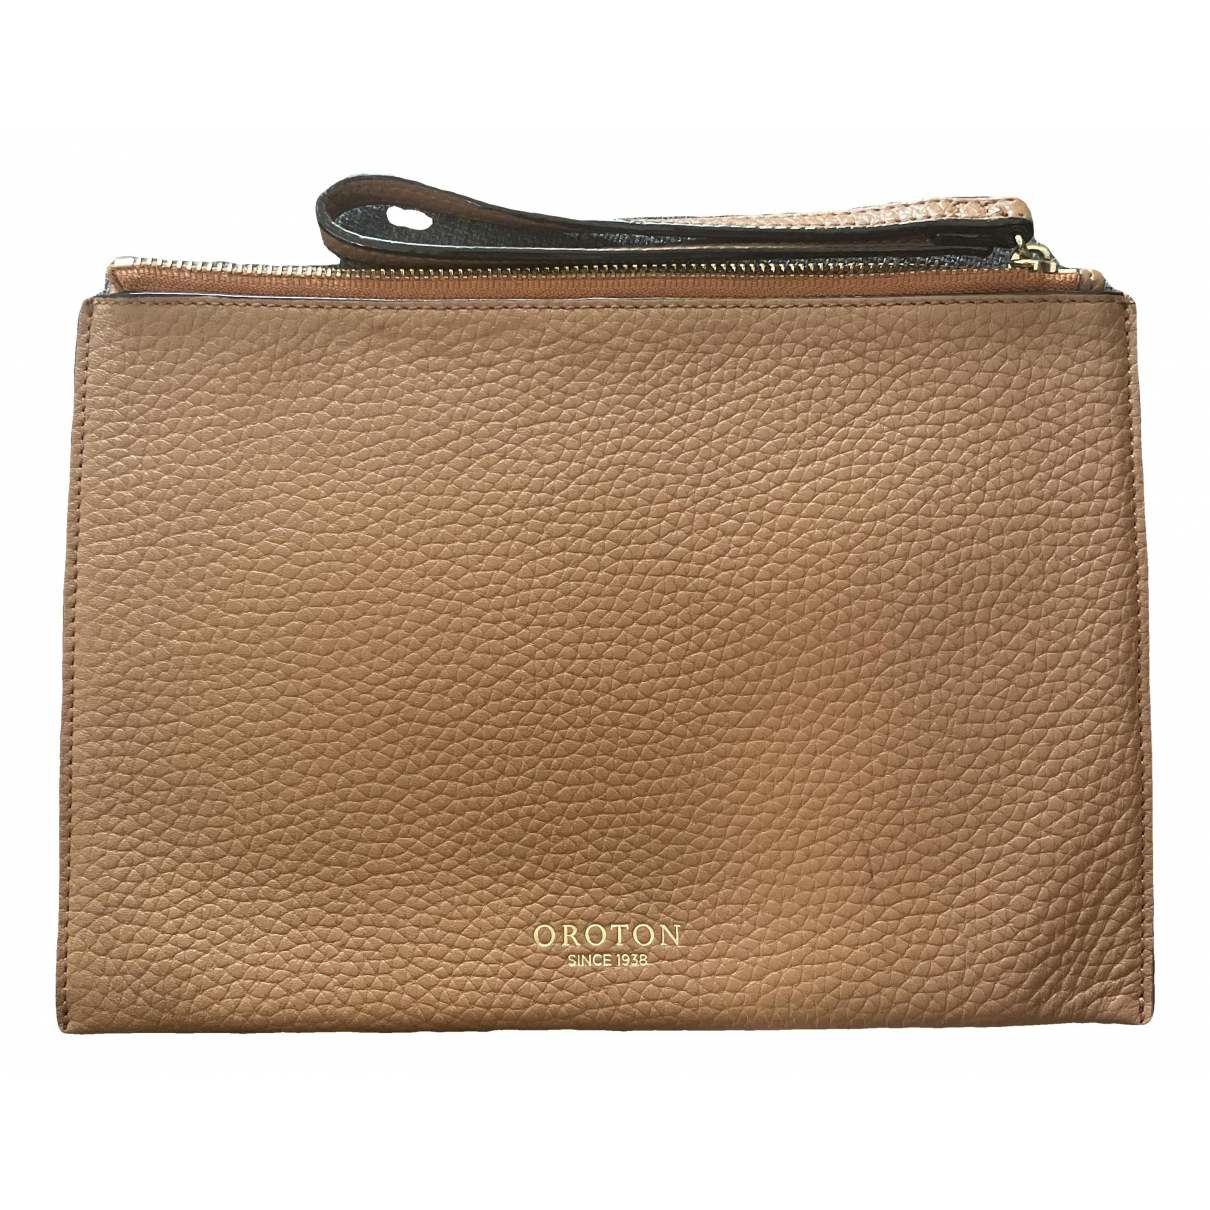 Brown Leather Clutch Bag